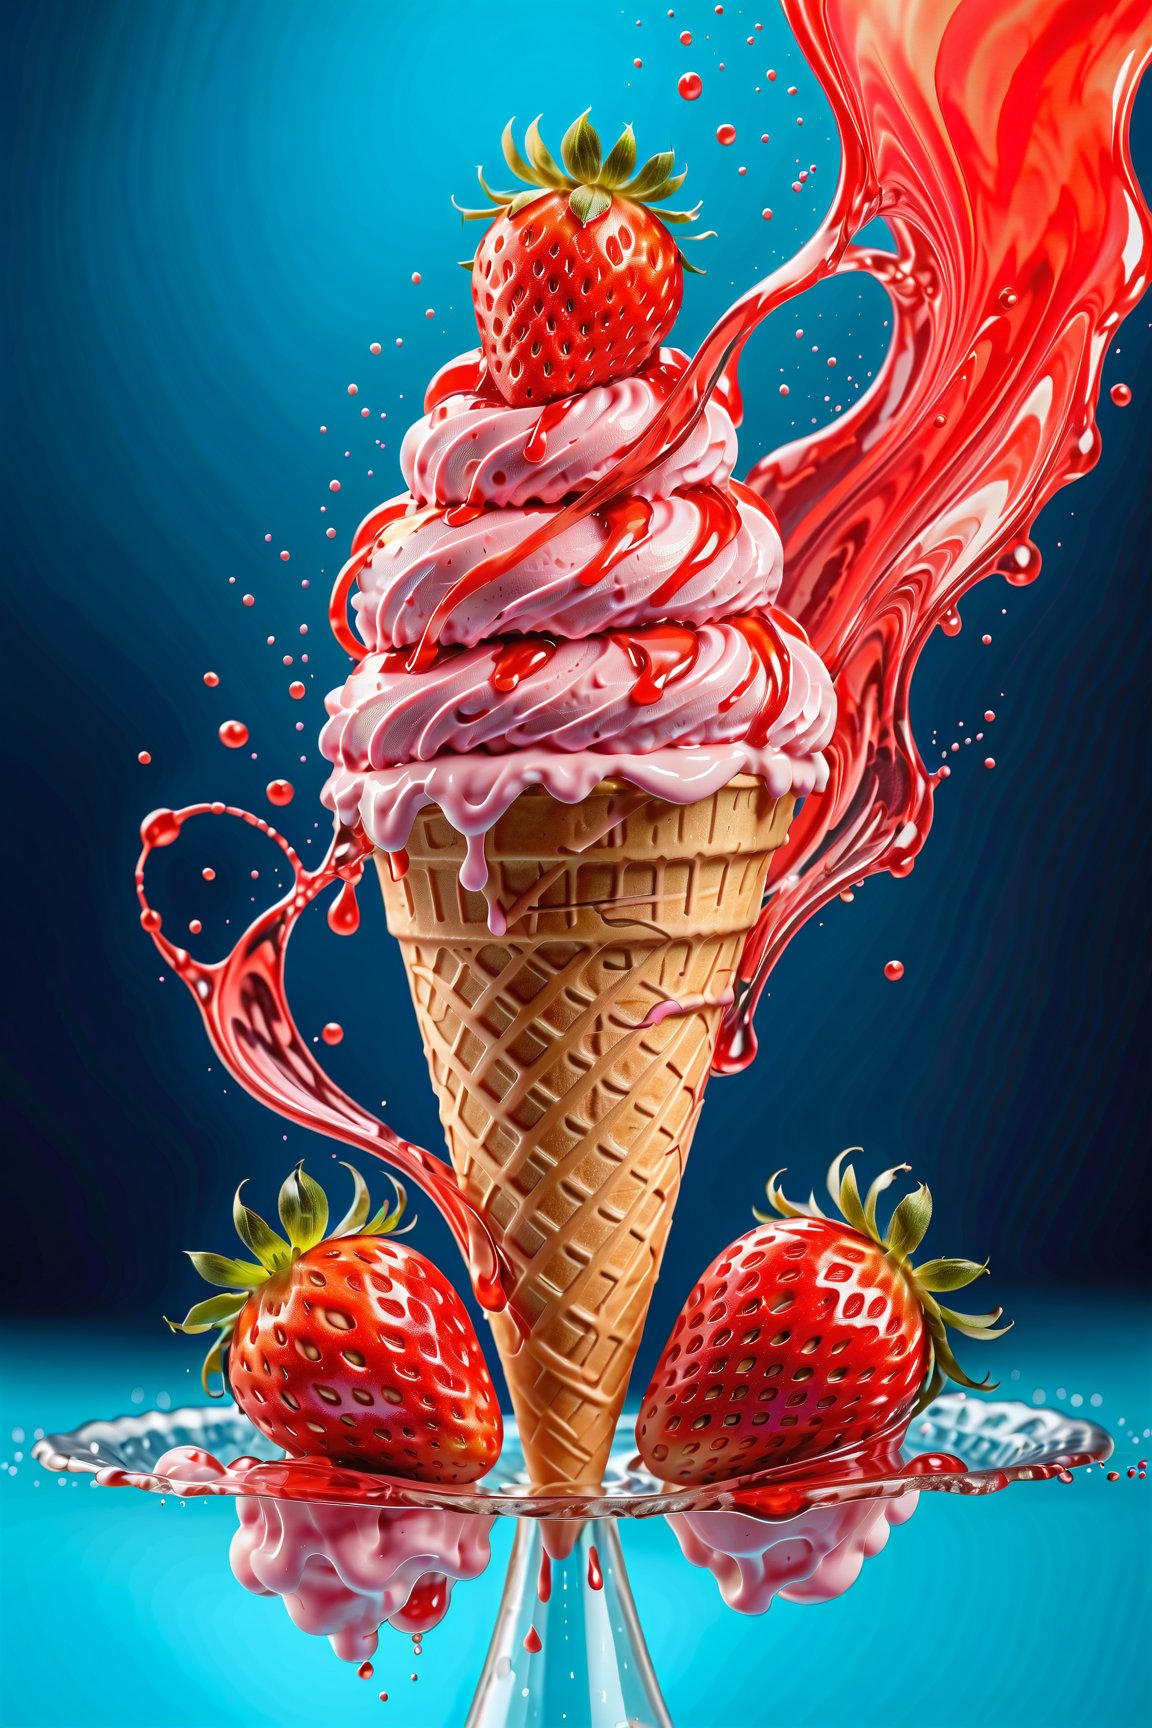 A delicate strawberry colorful luminescence ice cream concept design. Colorful water splash around the ice cream. A refreshing concept akin with a product photoshoot

